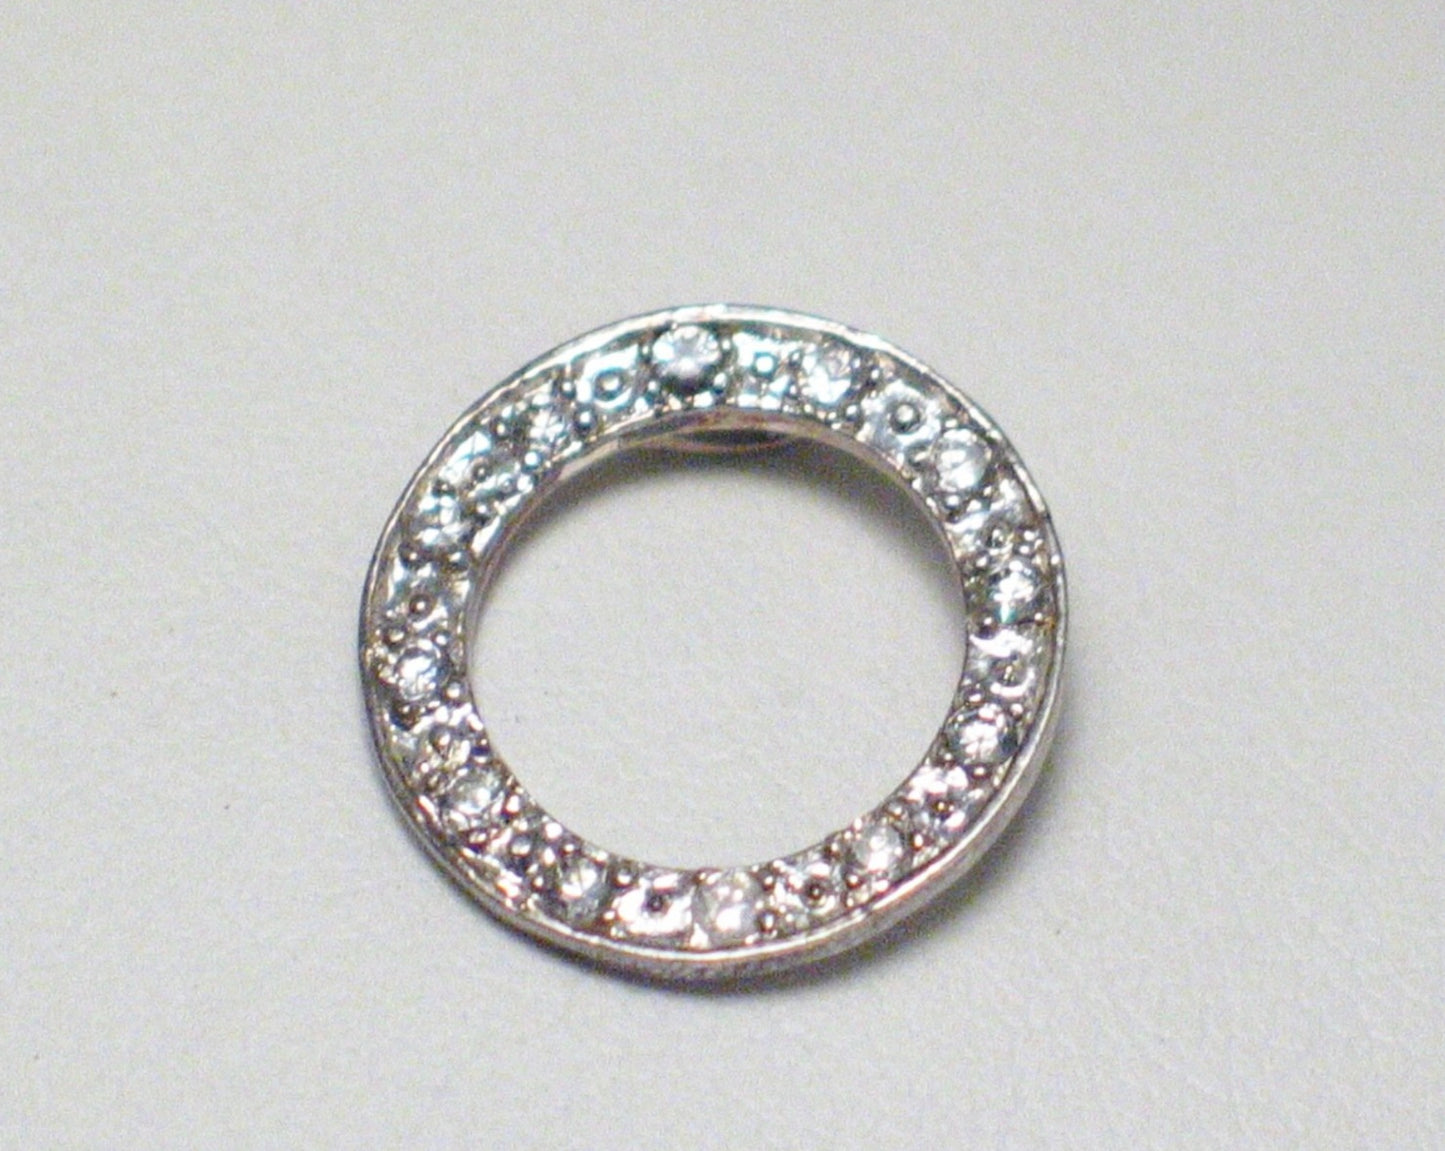 Ring of Life | Petite Sterling Silver Halo Pendant w/ Cubic Zirconia - Blingschlingers Jewelry